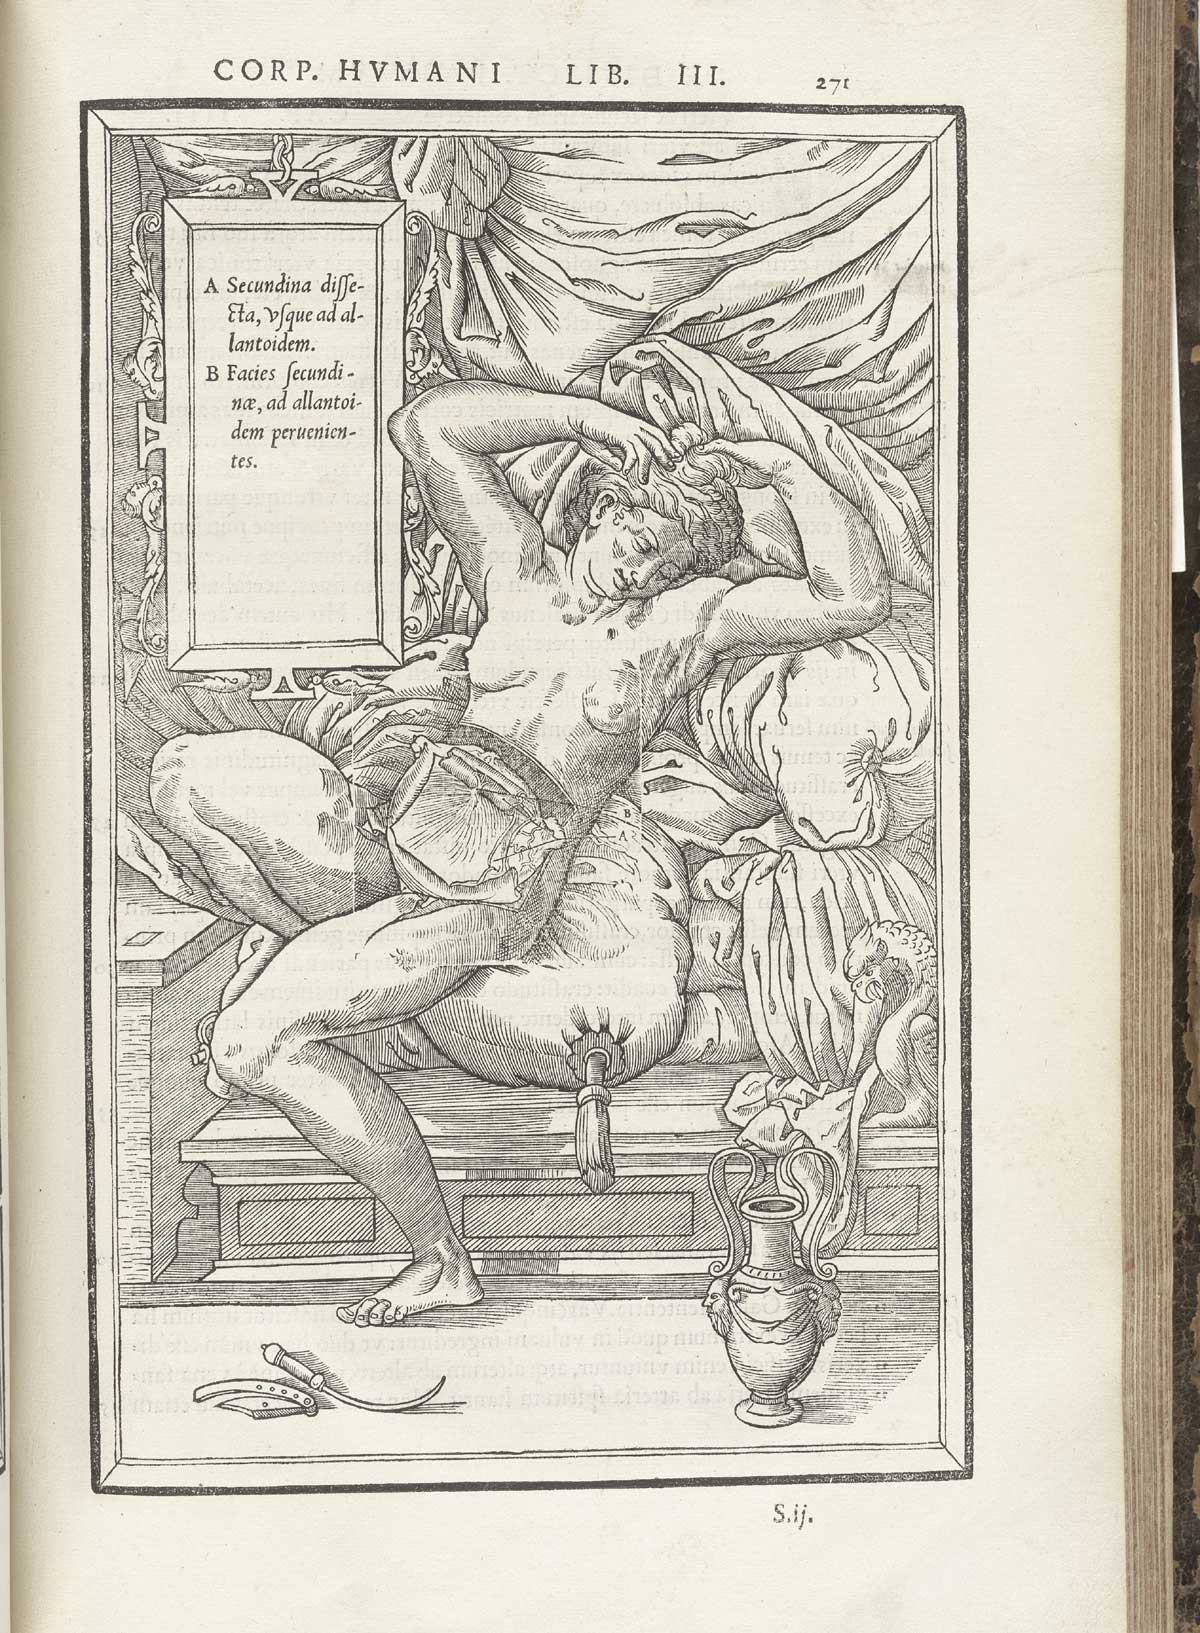 Woodcut of a facing pregnant female figure laying back on luxurious cushions with layers of flesh removed from the abdomen to reveal the placenta and allantois; the woman has long flowing hair and is facing the viewer; a tablet giving text in Latin about the indicated body parts hangs above and to the left of the figure; from Charles Estienne’s De dissection partium corporis humani libri tres, NLM Call no.: WZ 240 E81dd 1545.